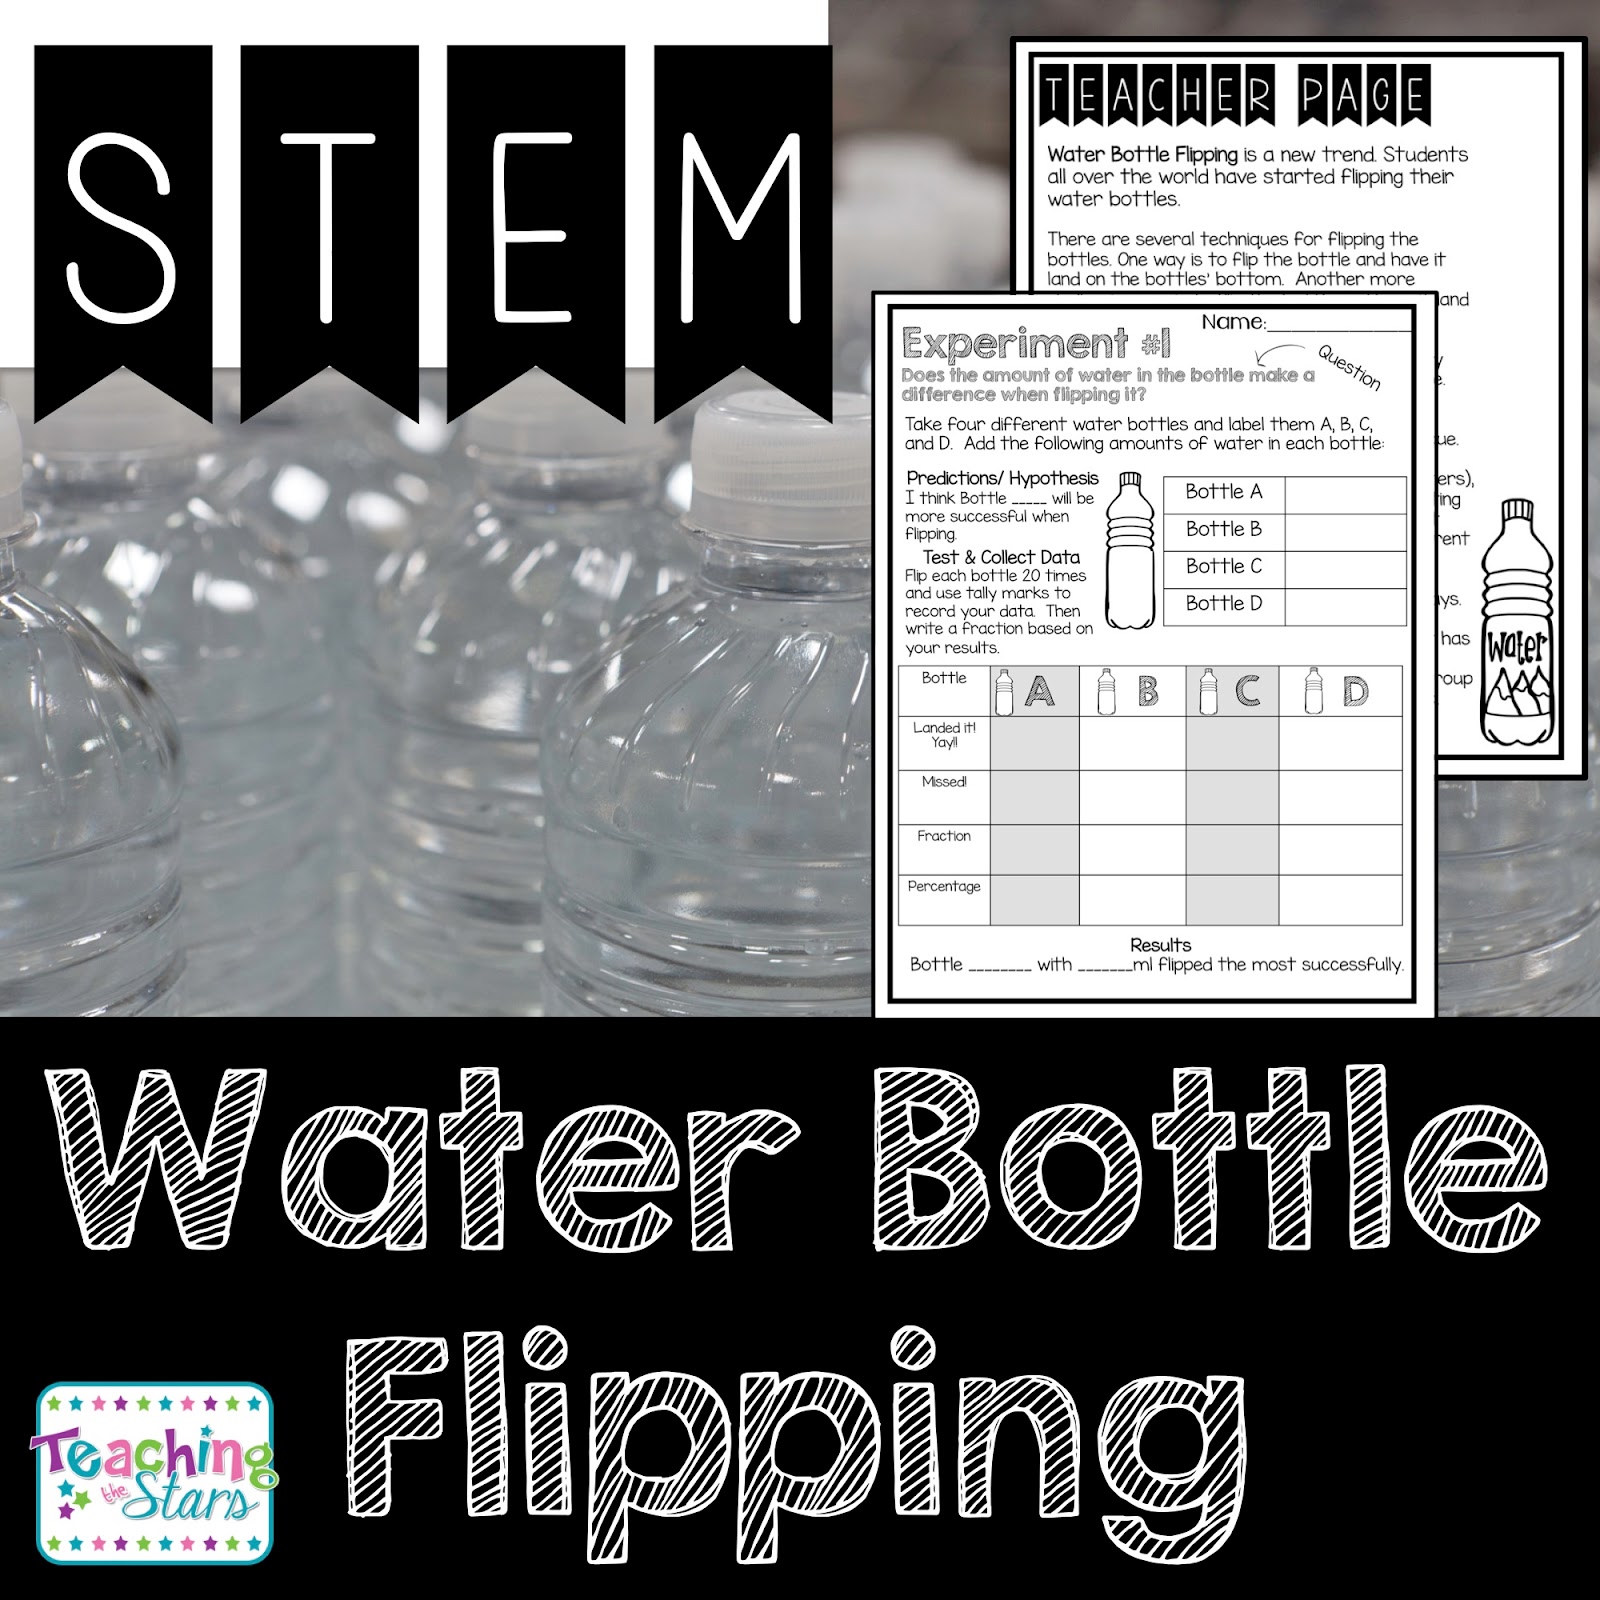 Water Bottles in the Classroom - Fluttering Through the Grades